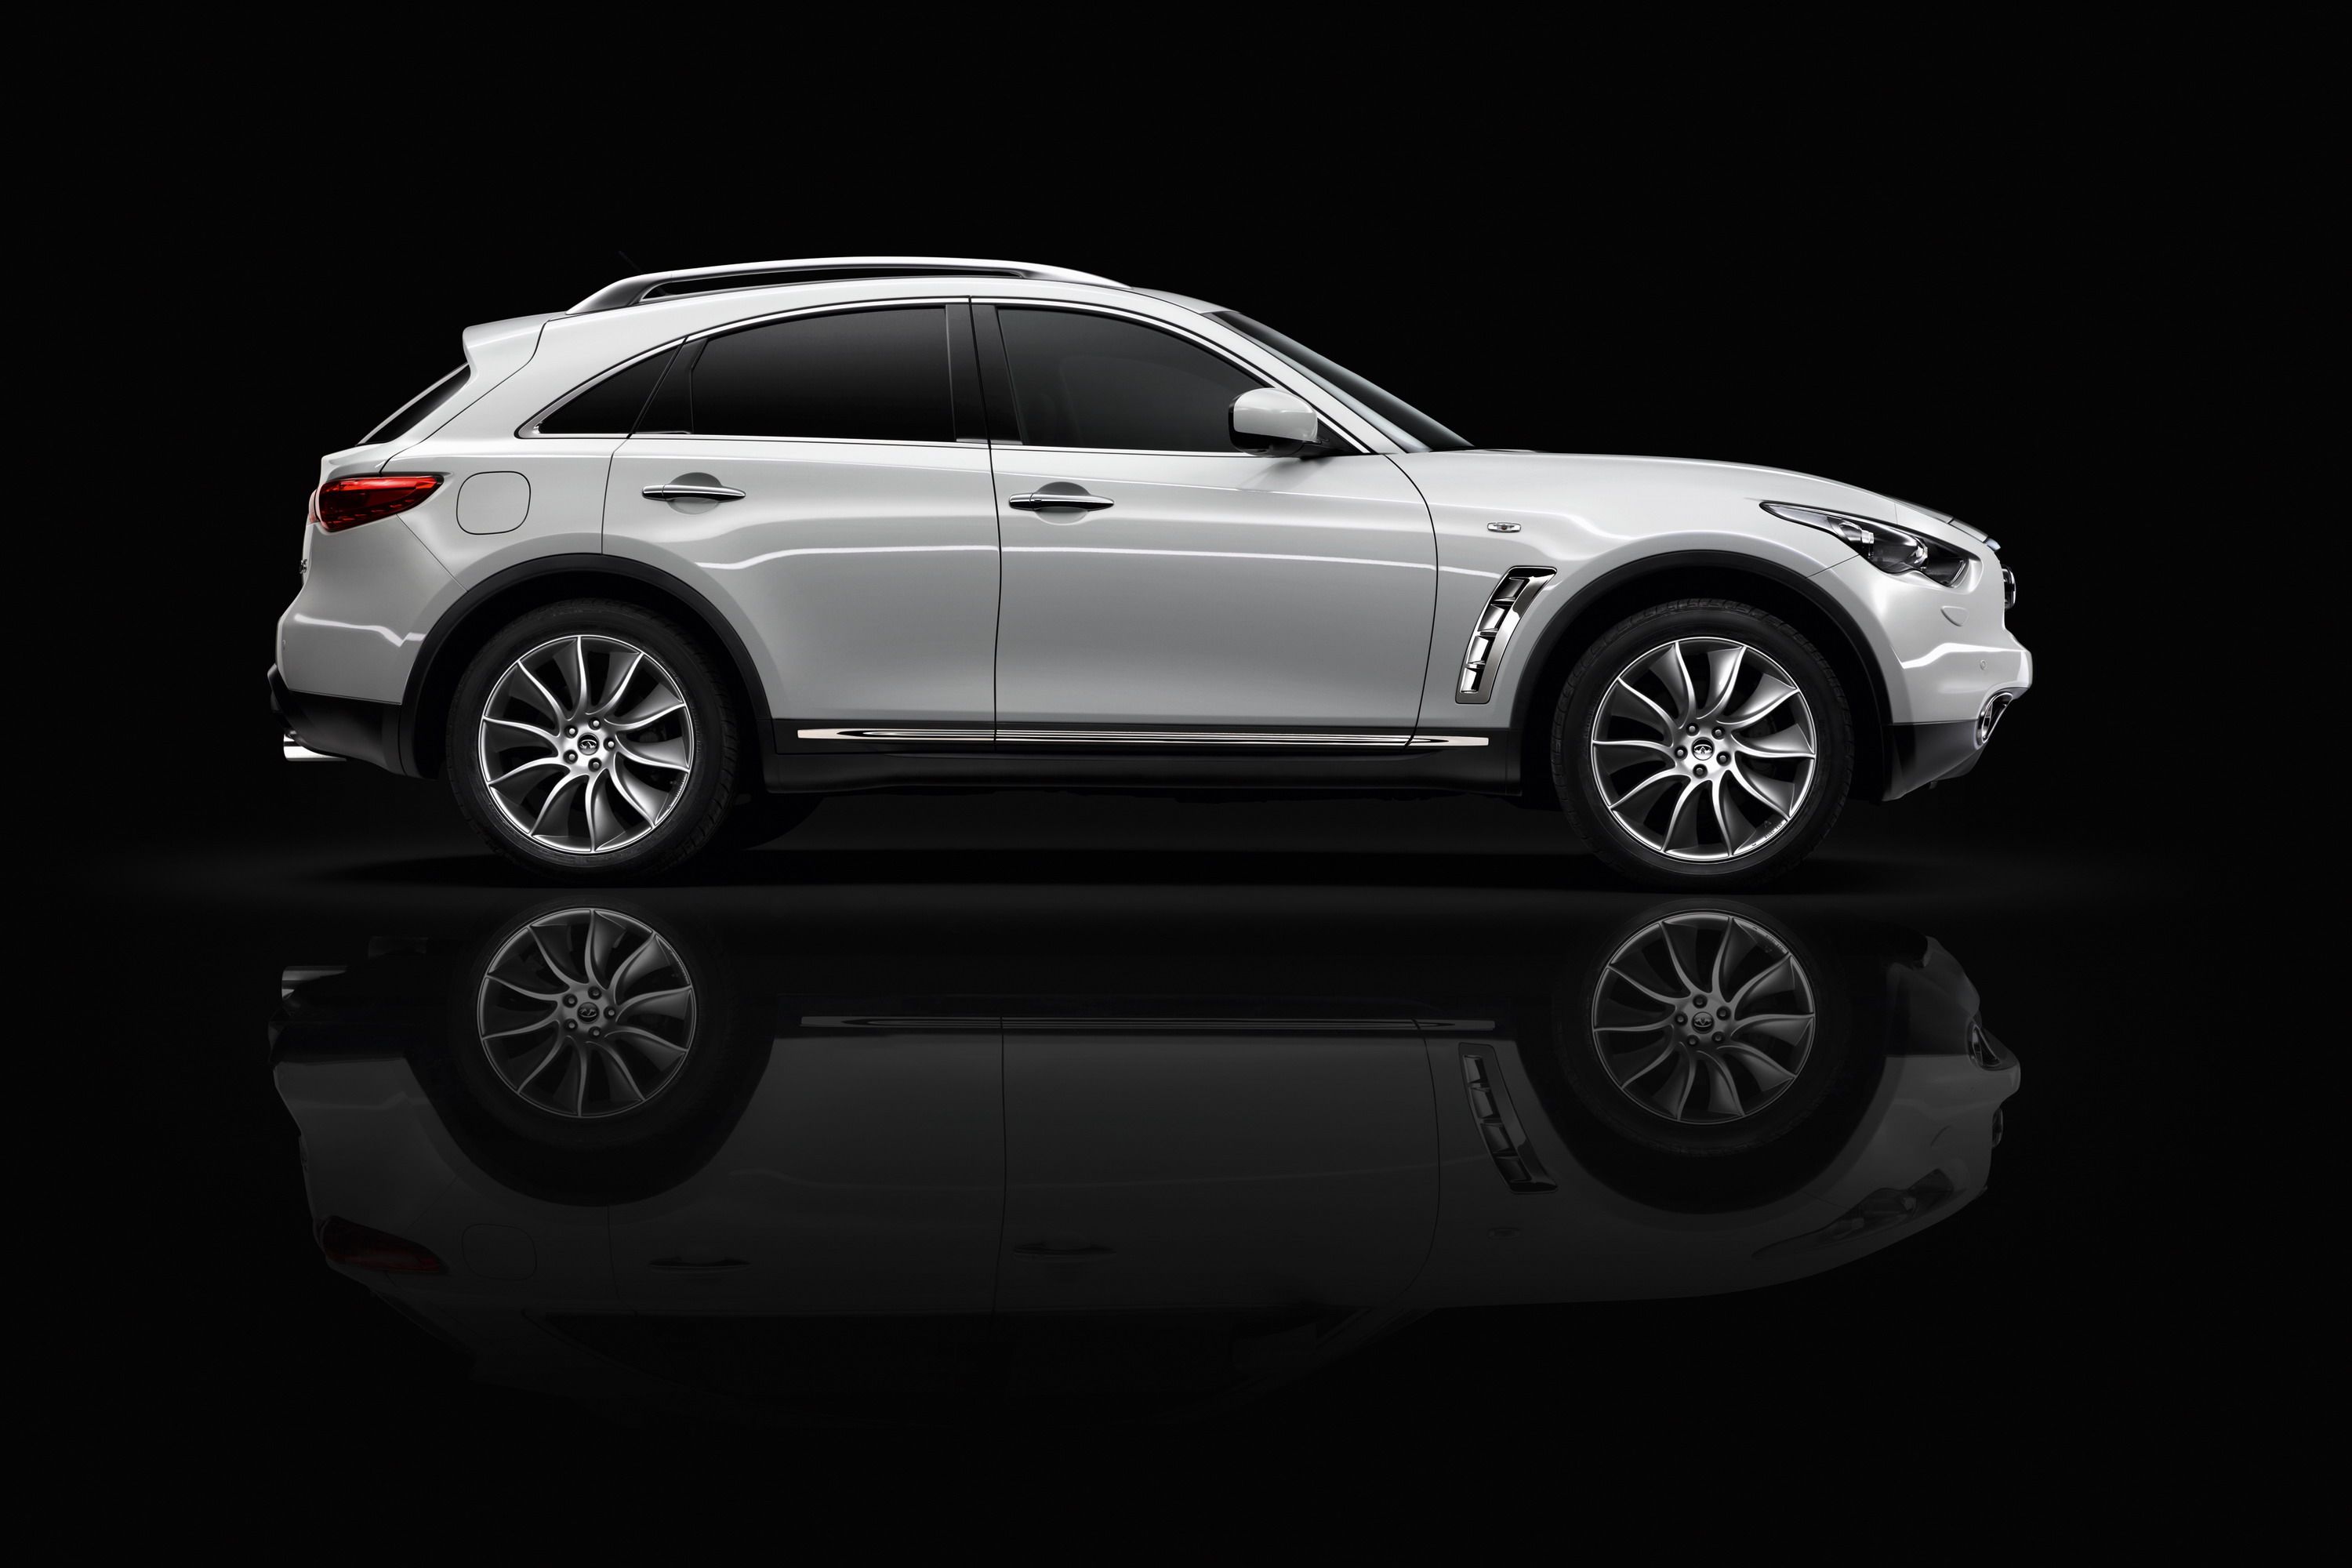 2013 Infiniti FX Black and White Editions